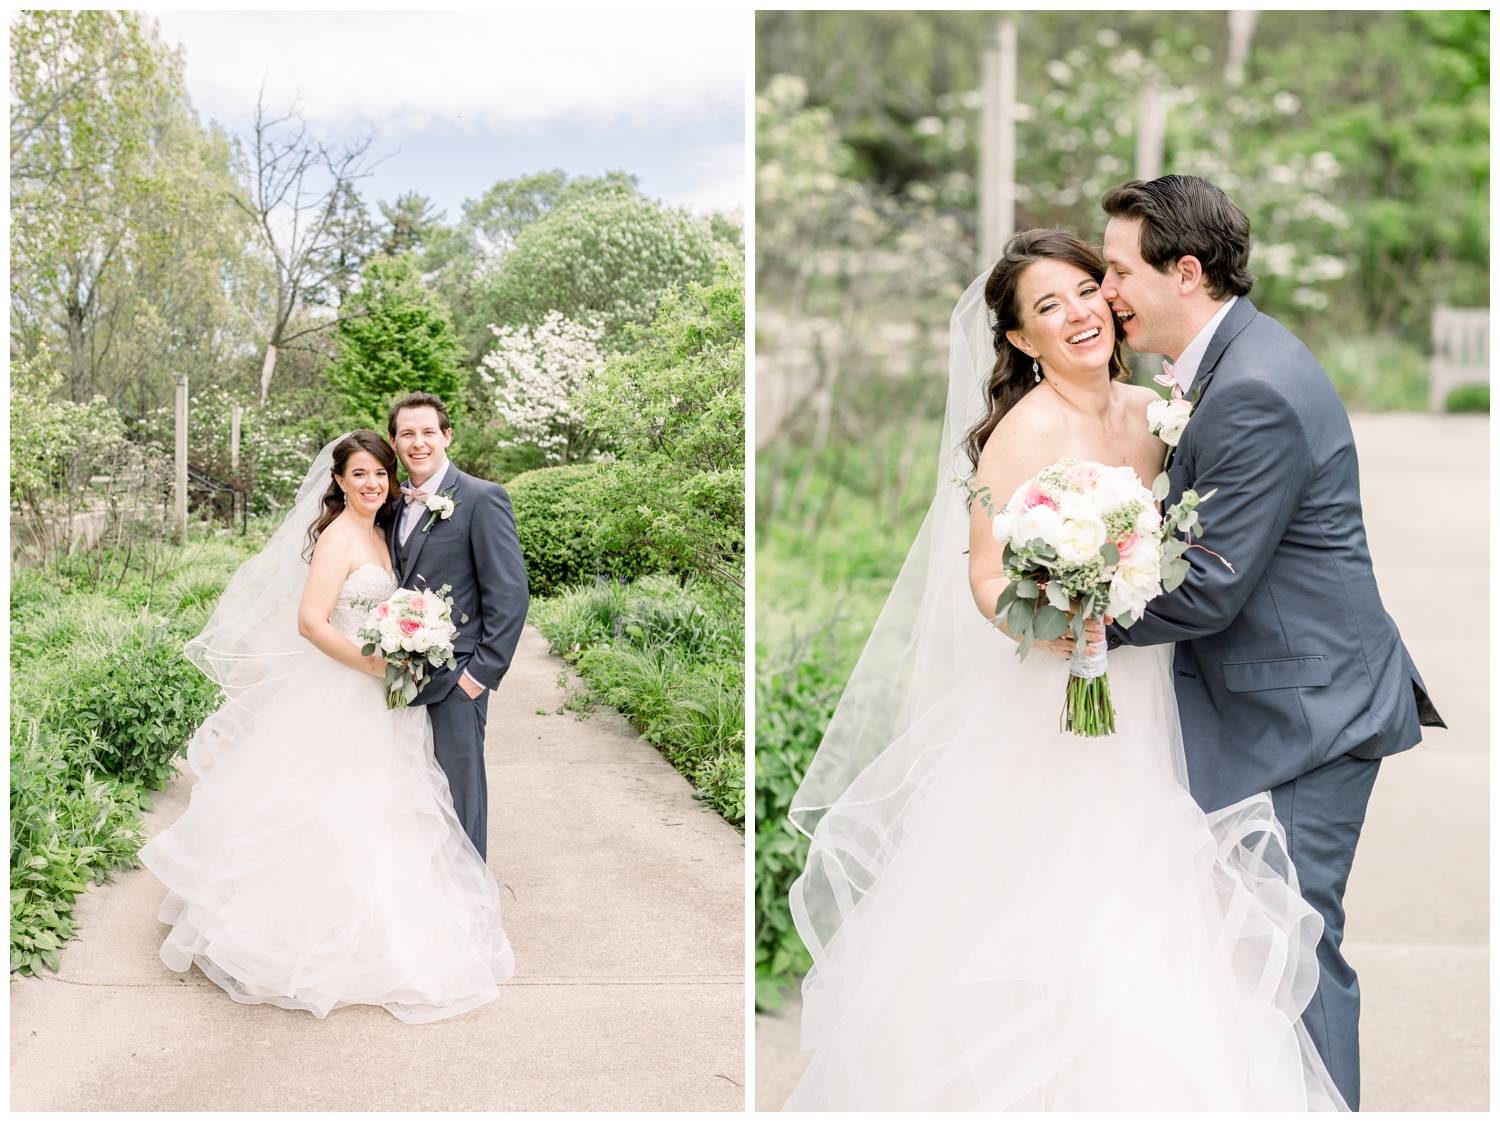 Bride and Groom at Ault Park Gardens